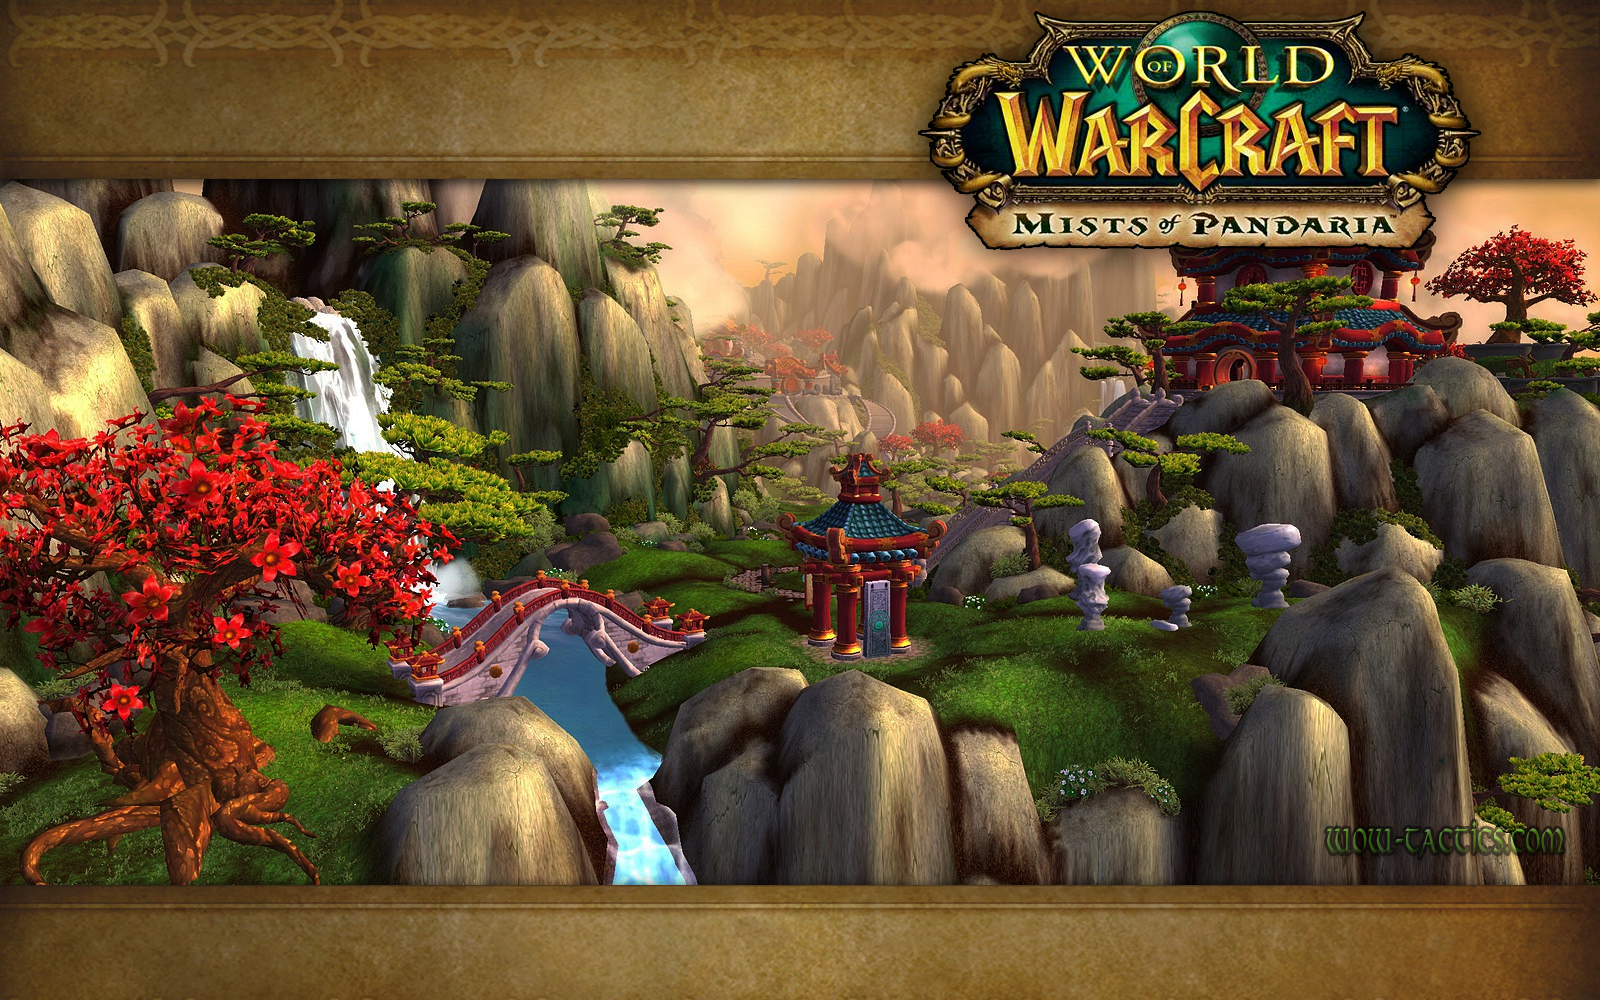 World Of Warcraft Mists Of Pandaria Wallpaper - All Things Andy Gavin